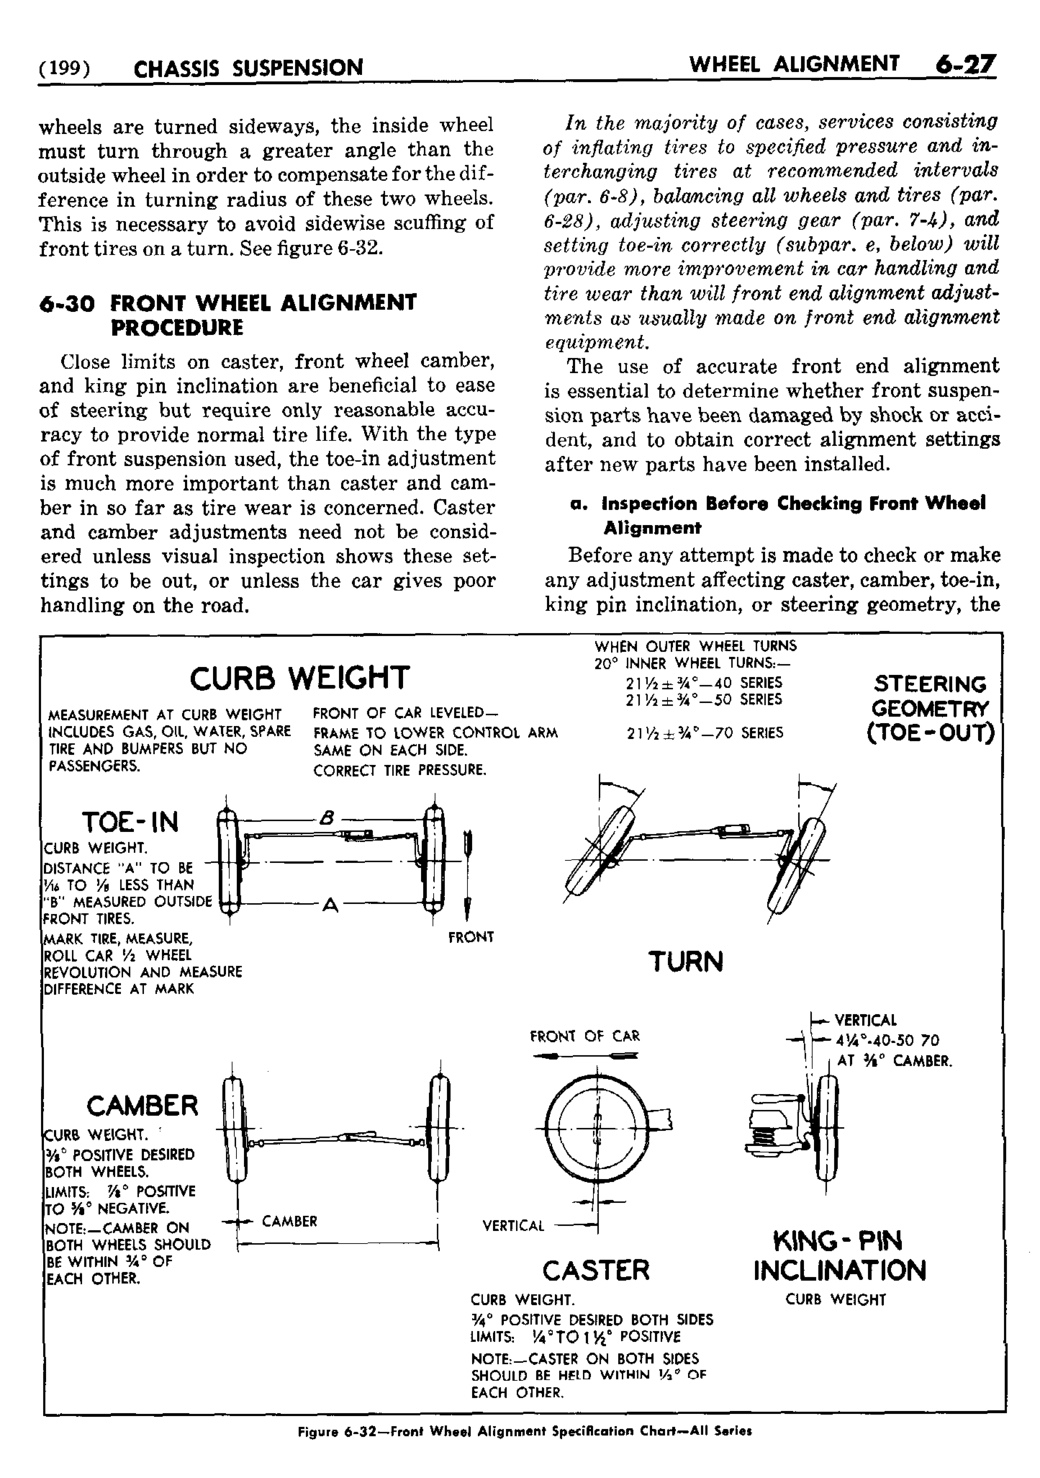 n_07 1950 Buick Shop Manual - Chassis Suspension-027-027.jpg